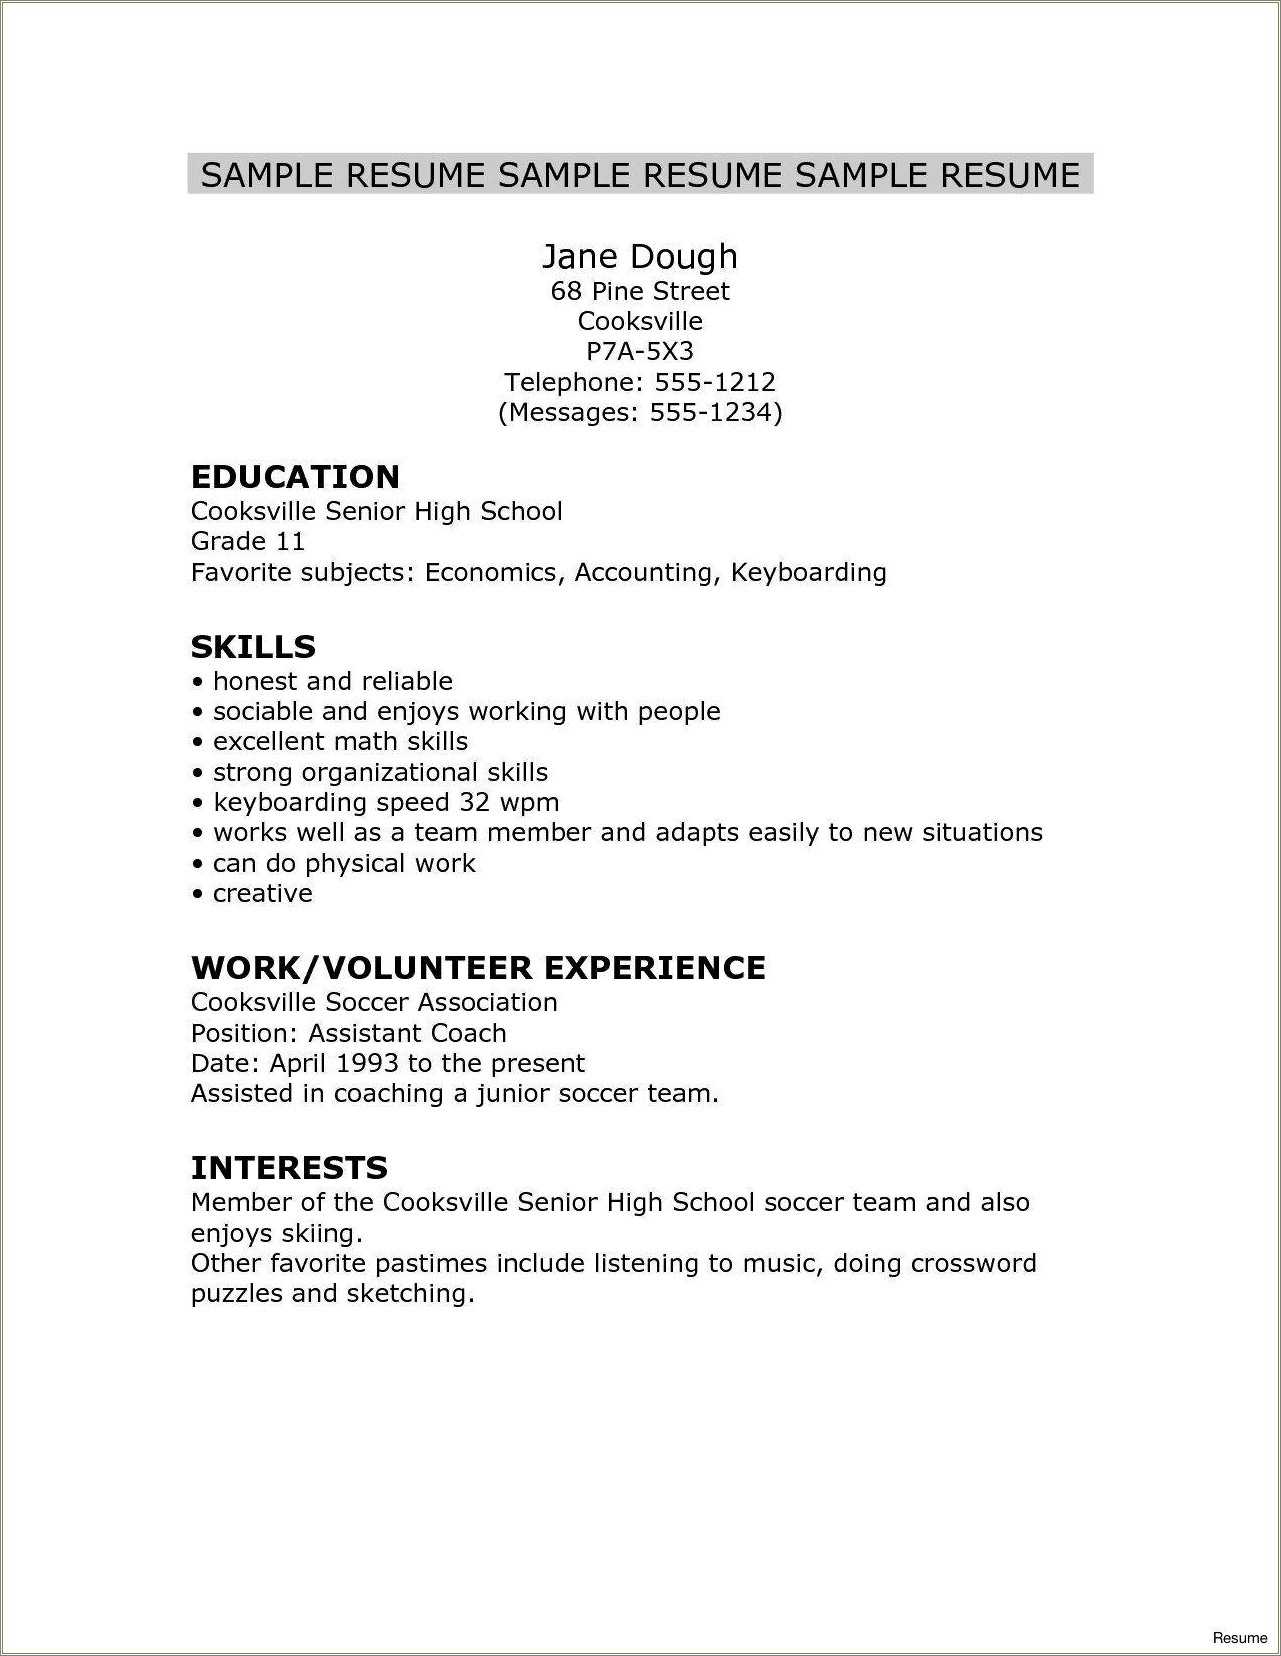 canadian-high-school-student-resume-examples-resume-example-gallery